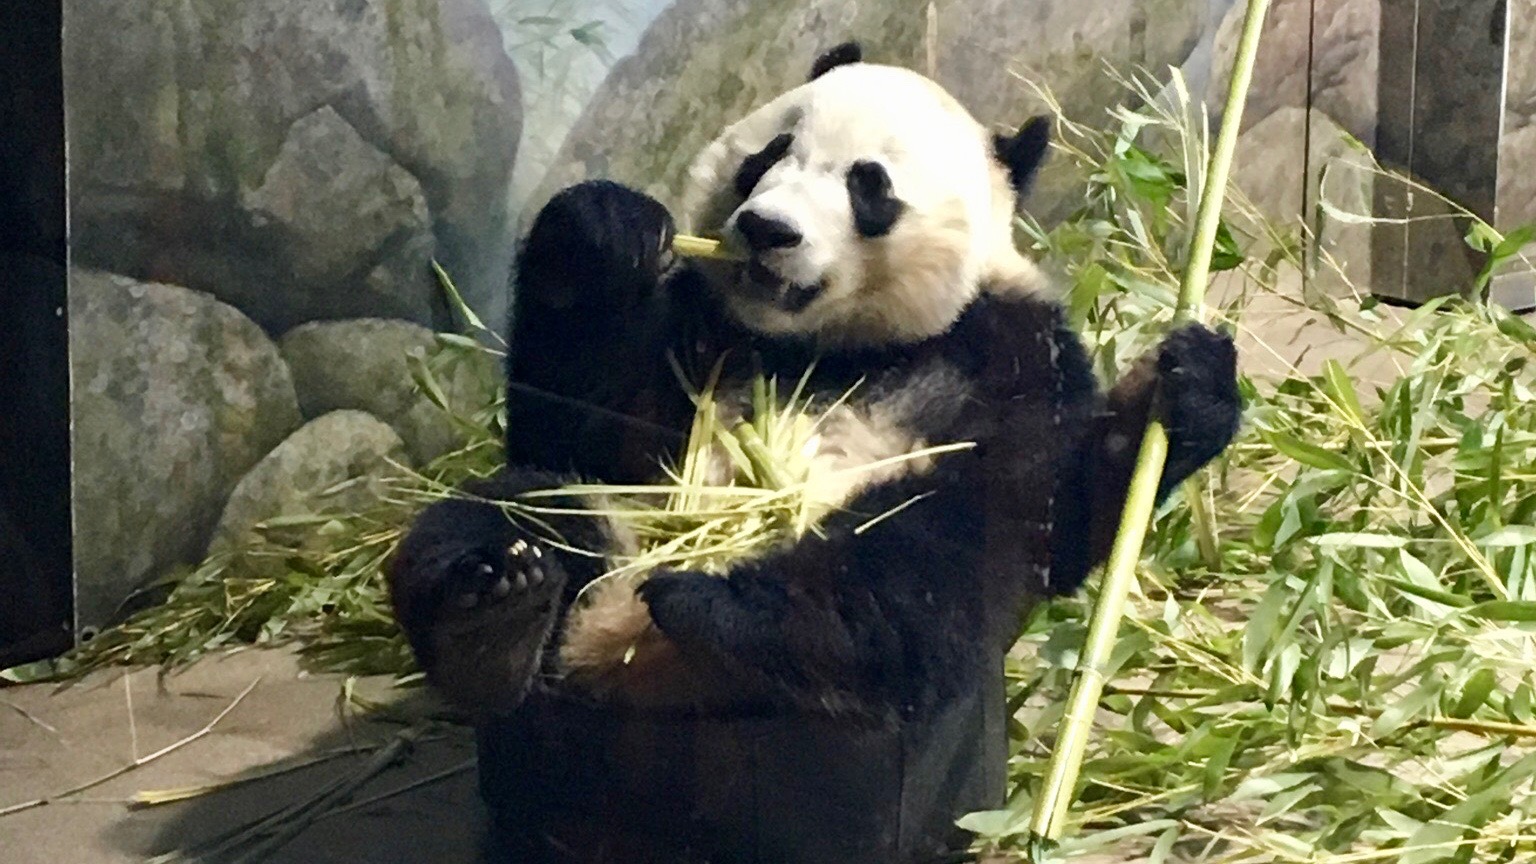 One of the three Giant Pandas in its enclosure at the Smithsonian National Zoological Park.